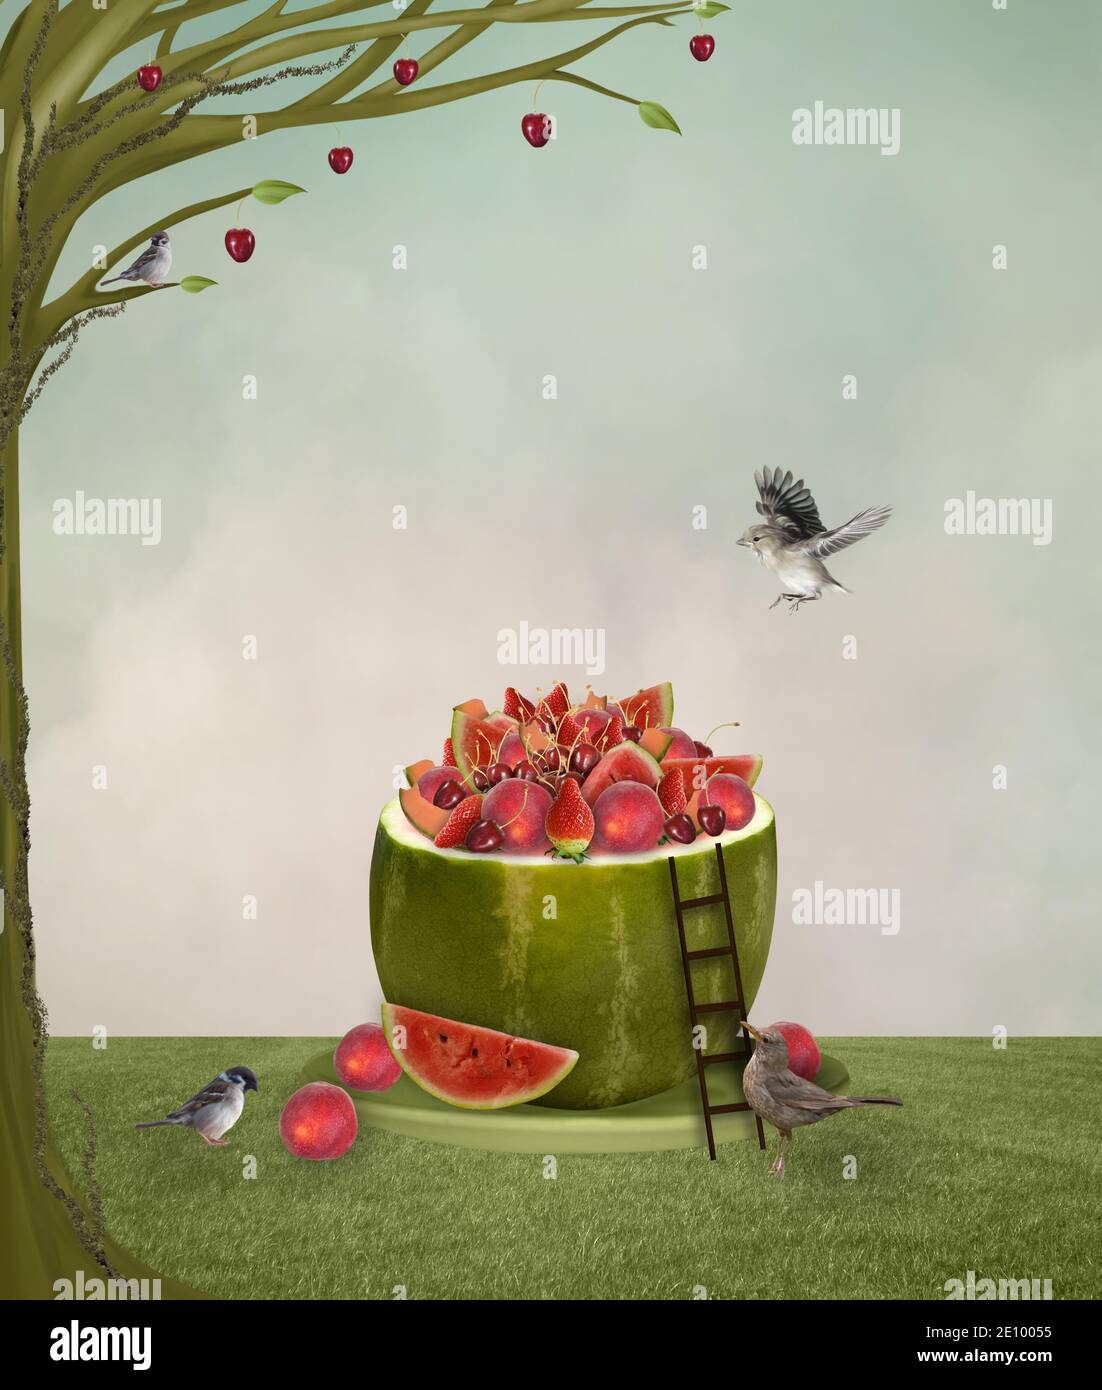 Fantasy countryside scenery with summer fruit and lovely birds Stock Photo